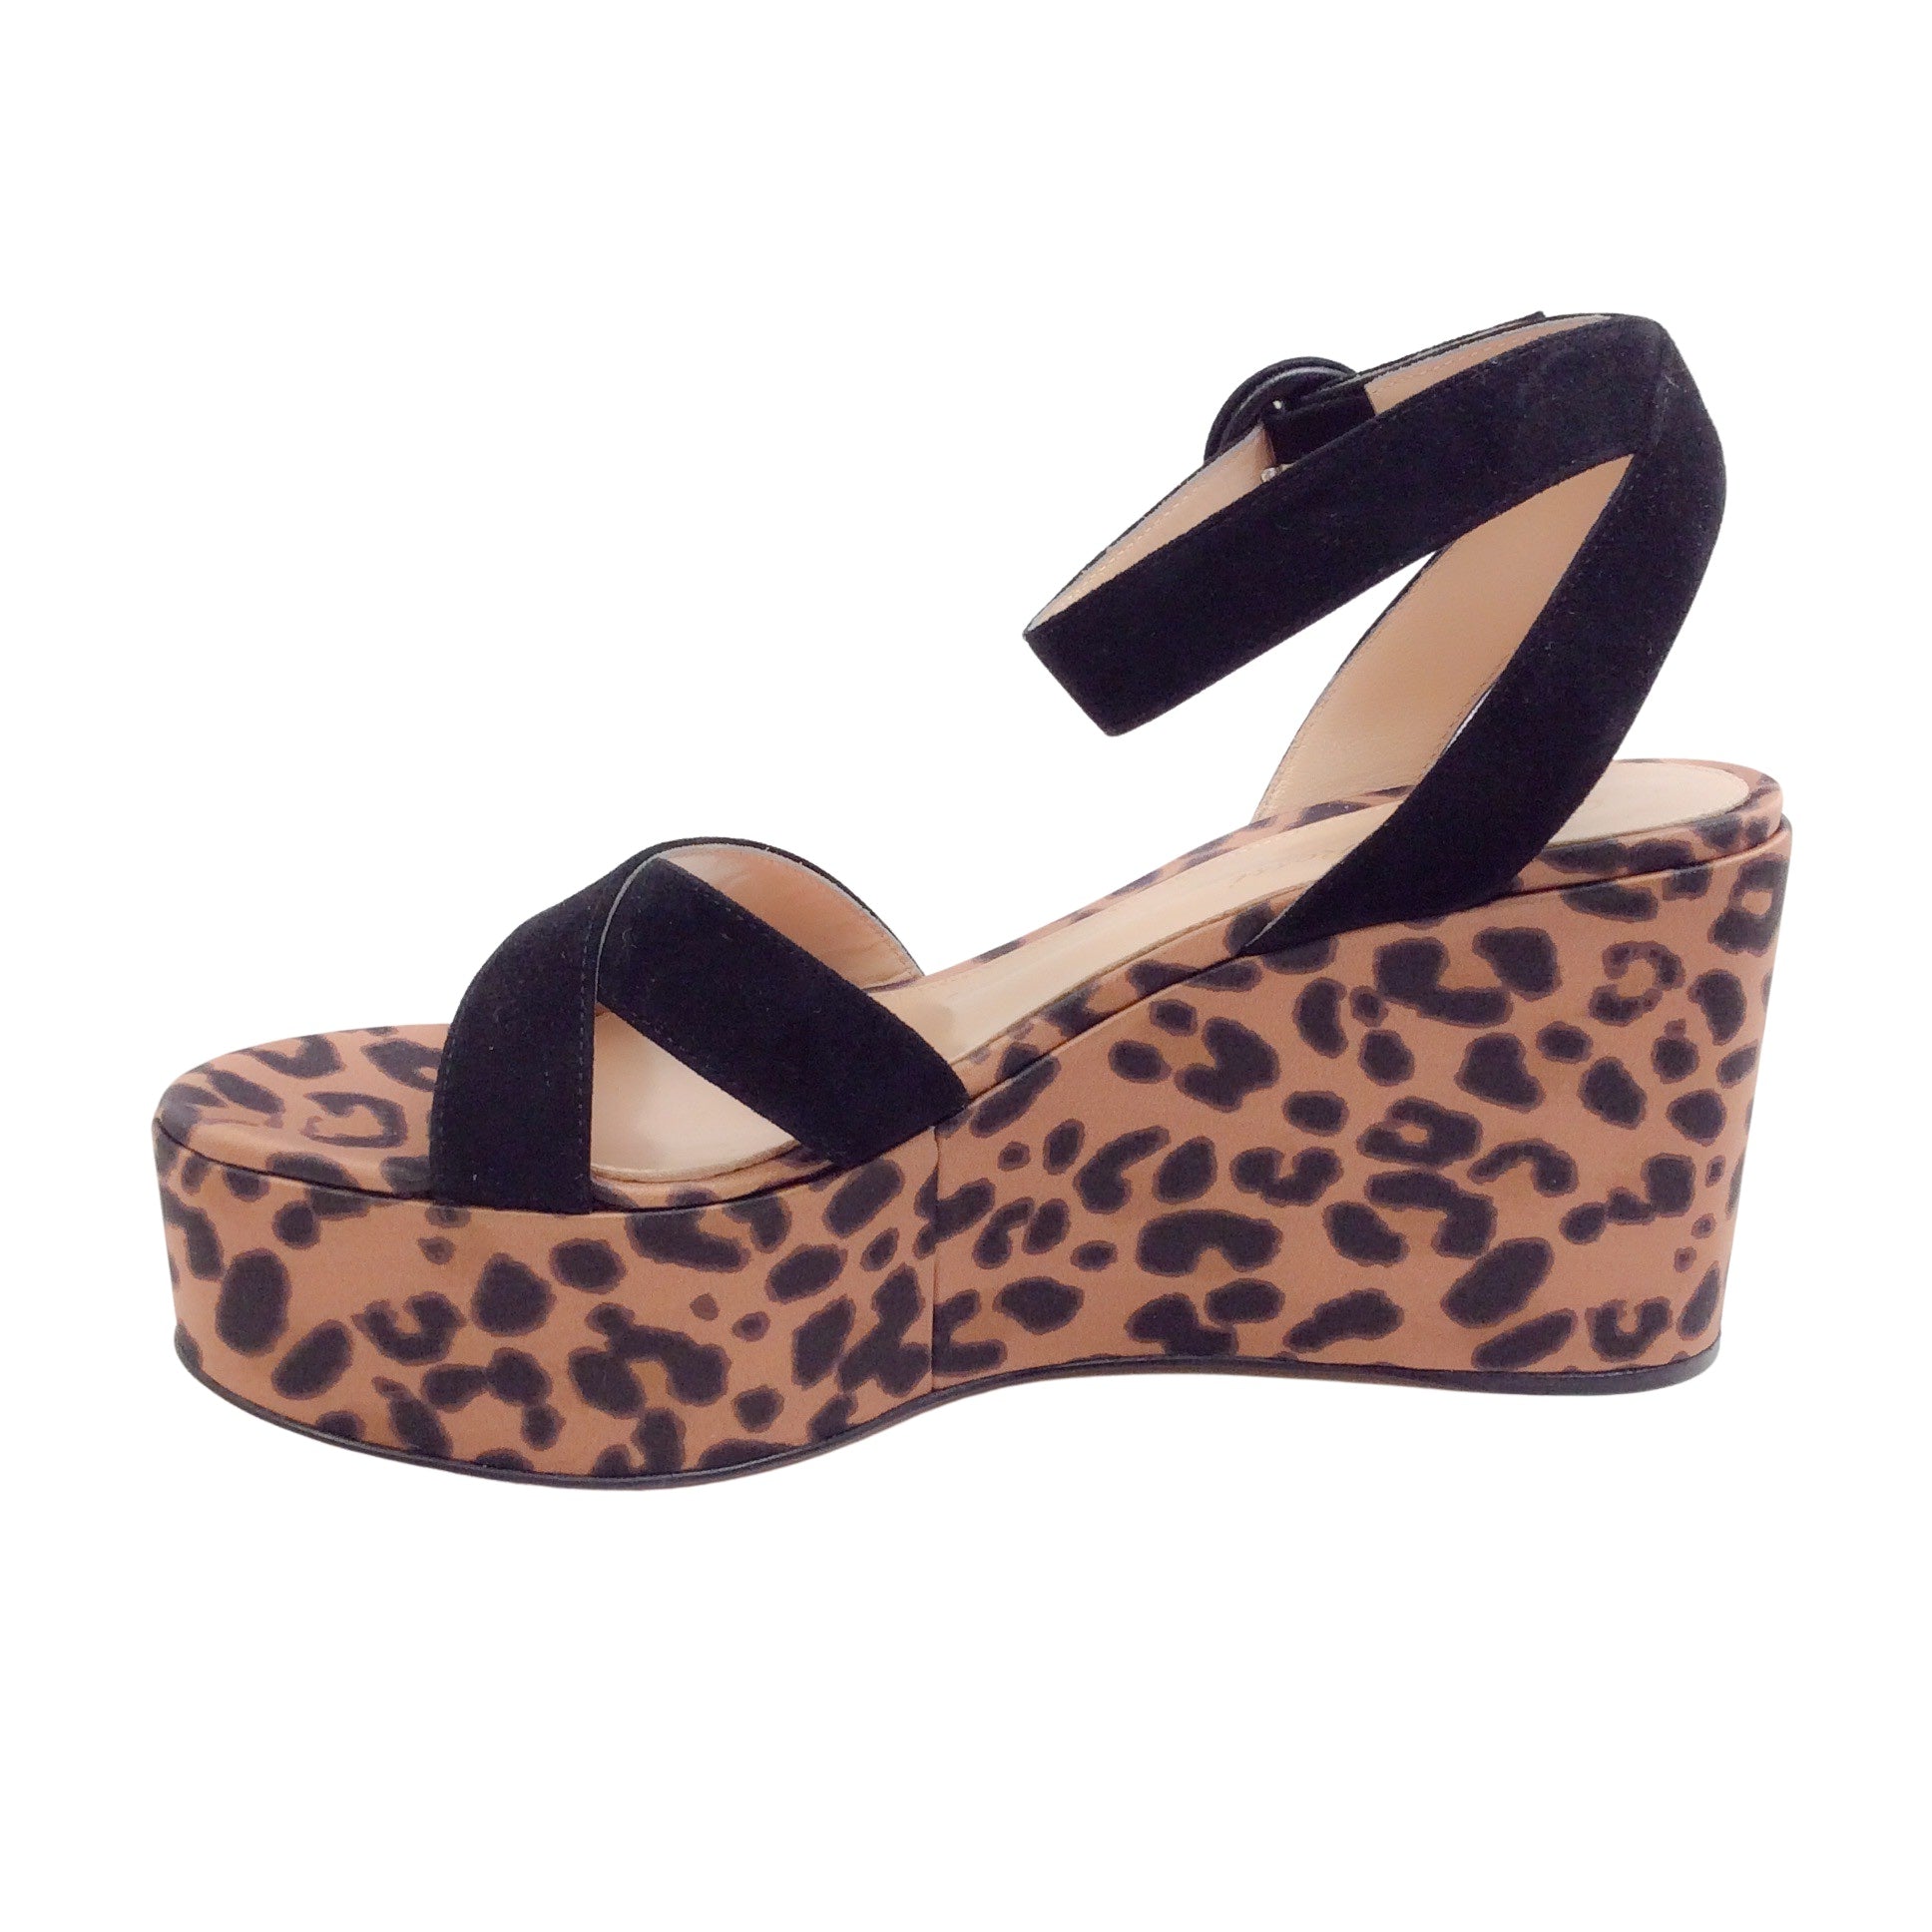 Gianvito Rossi Animal Print Ankle Strap Wedge Sandals